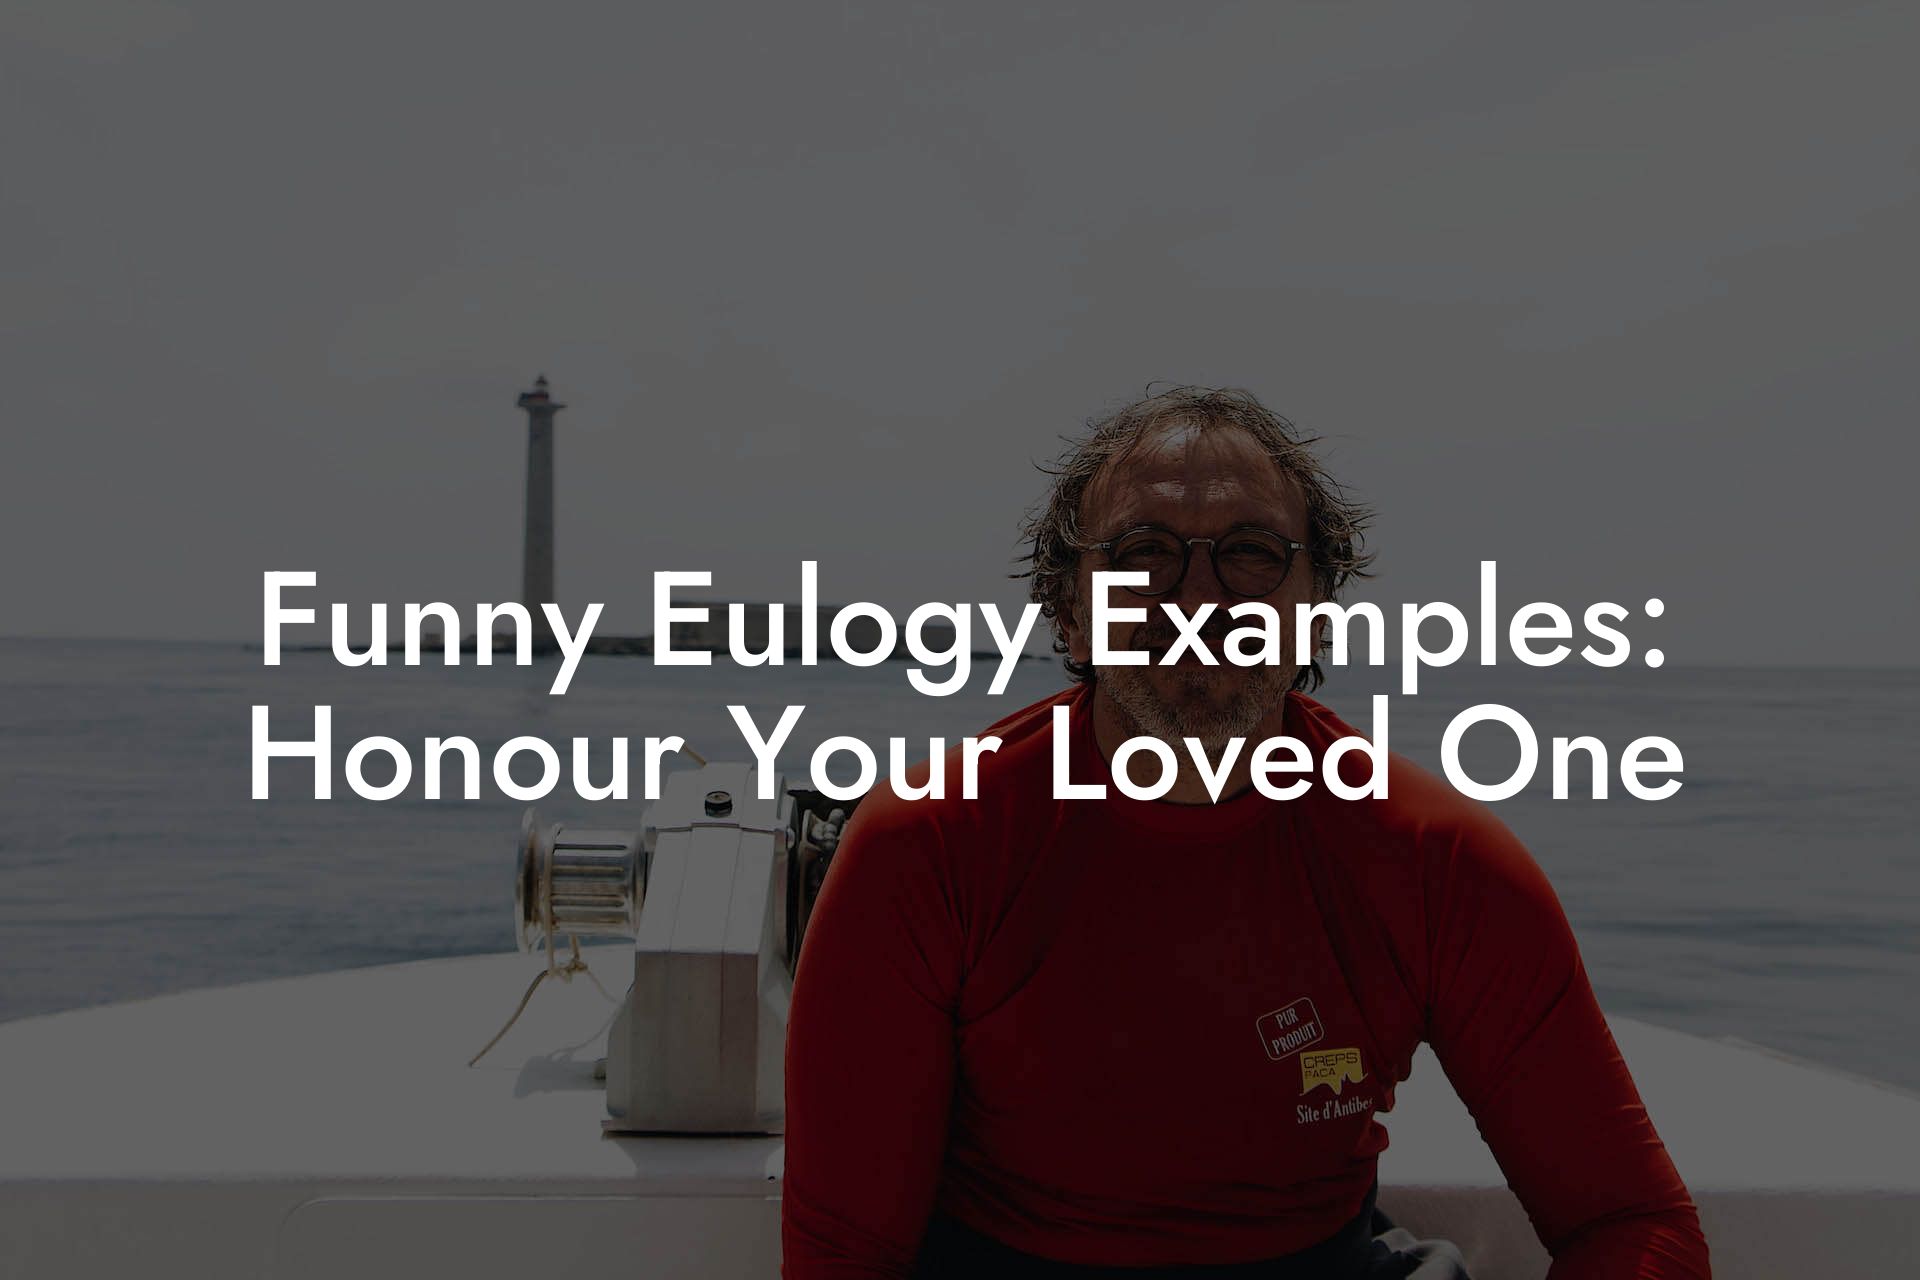 Funny Eulogy Examples: Honour Your Loved One